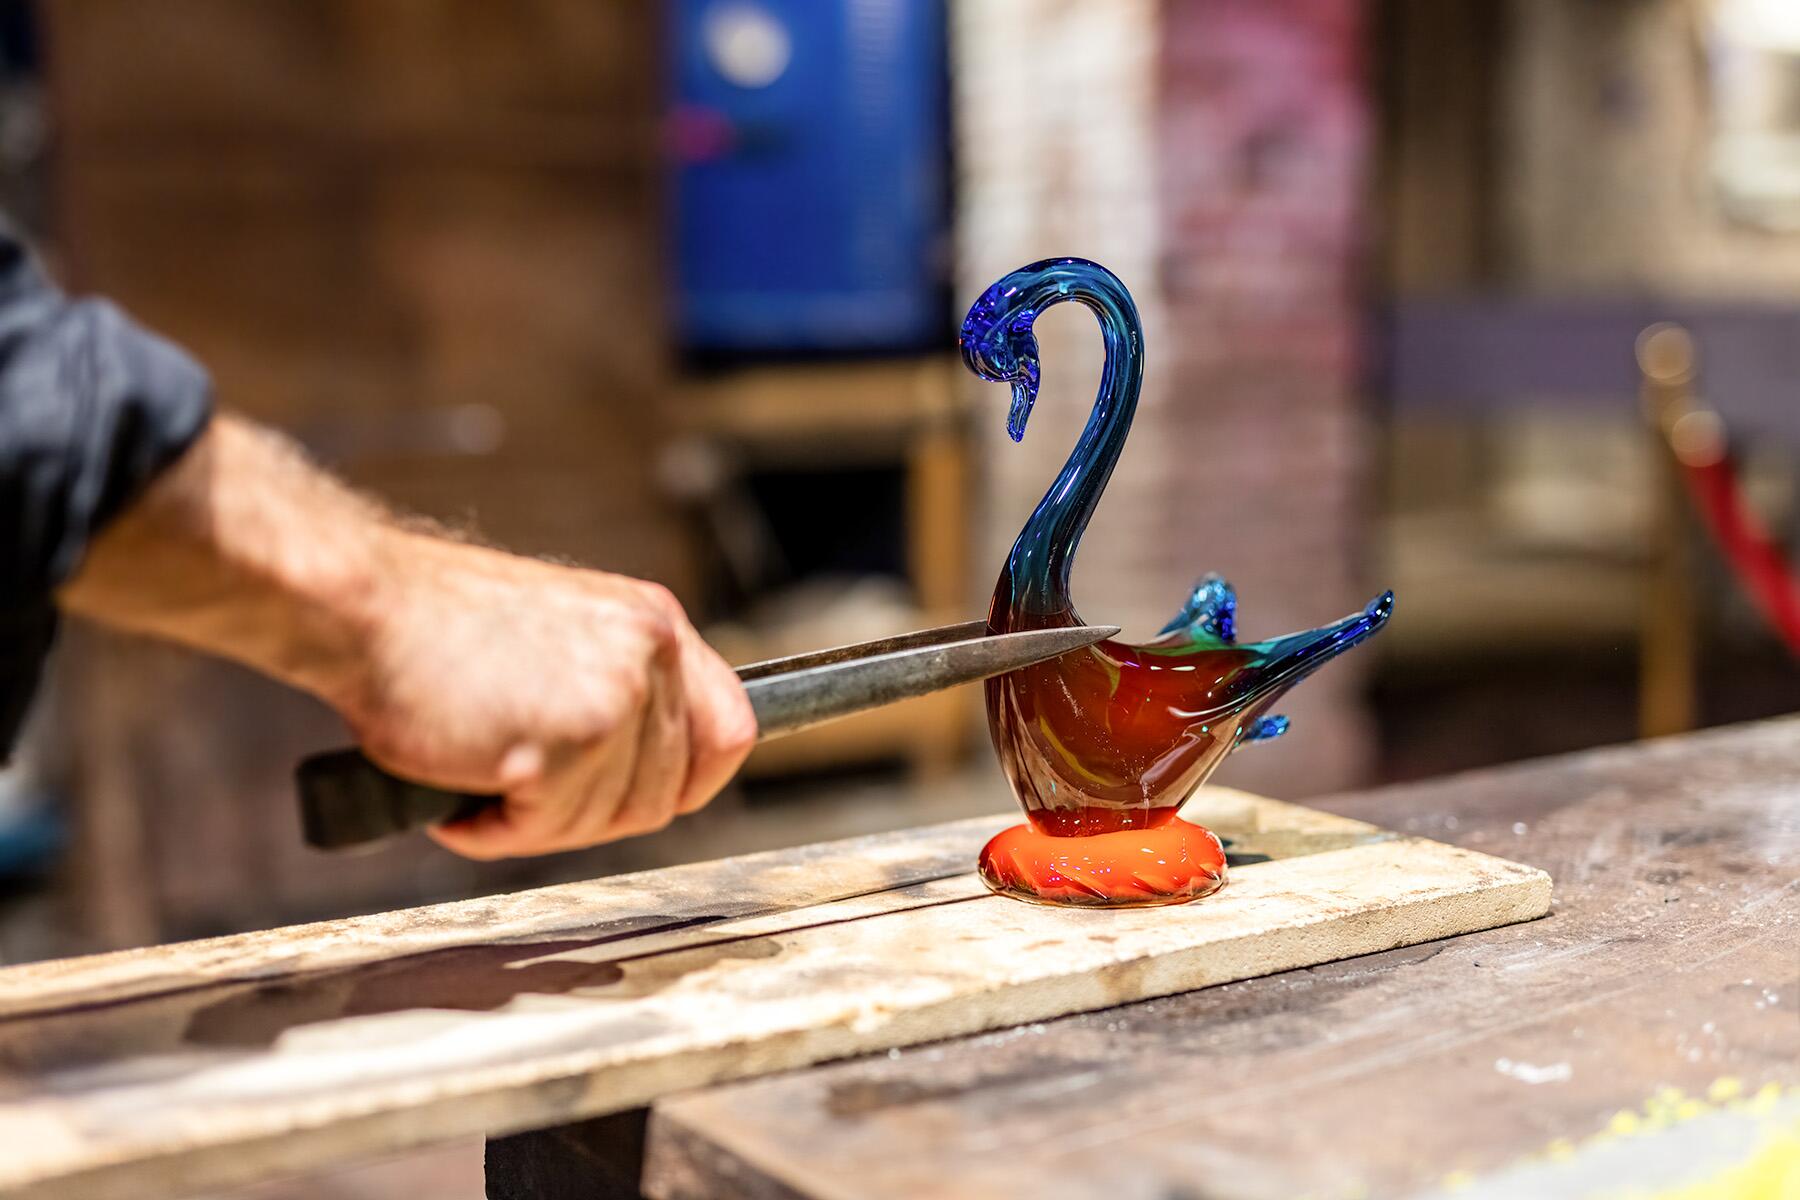 <a href='https://www.fodors.com/world/europe/italy/venice/experiences/news/photos/best-things-to-do-on-venices-other-islands#'>From &quot;The 15 Best Things to Do on Venice’s Other Islands: Watch a Glassmaking Demonstration on Murano&quot;</a>